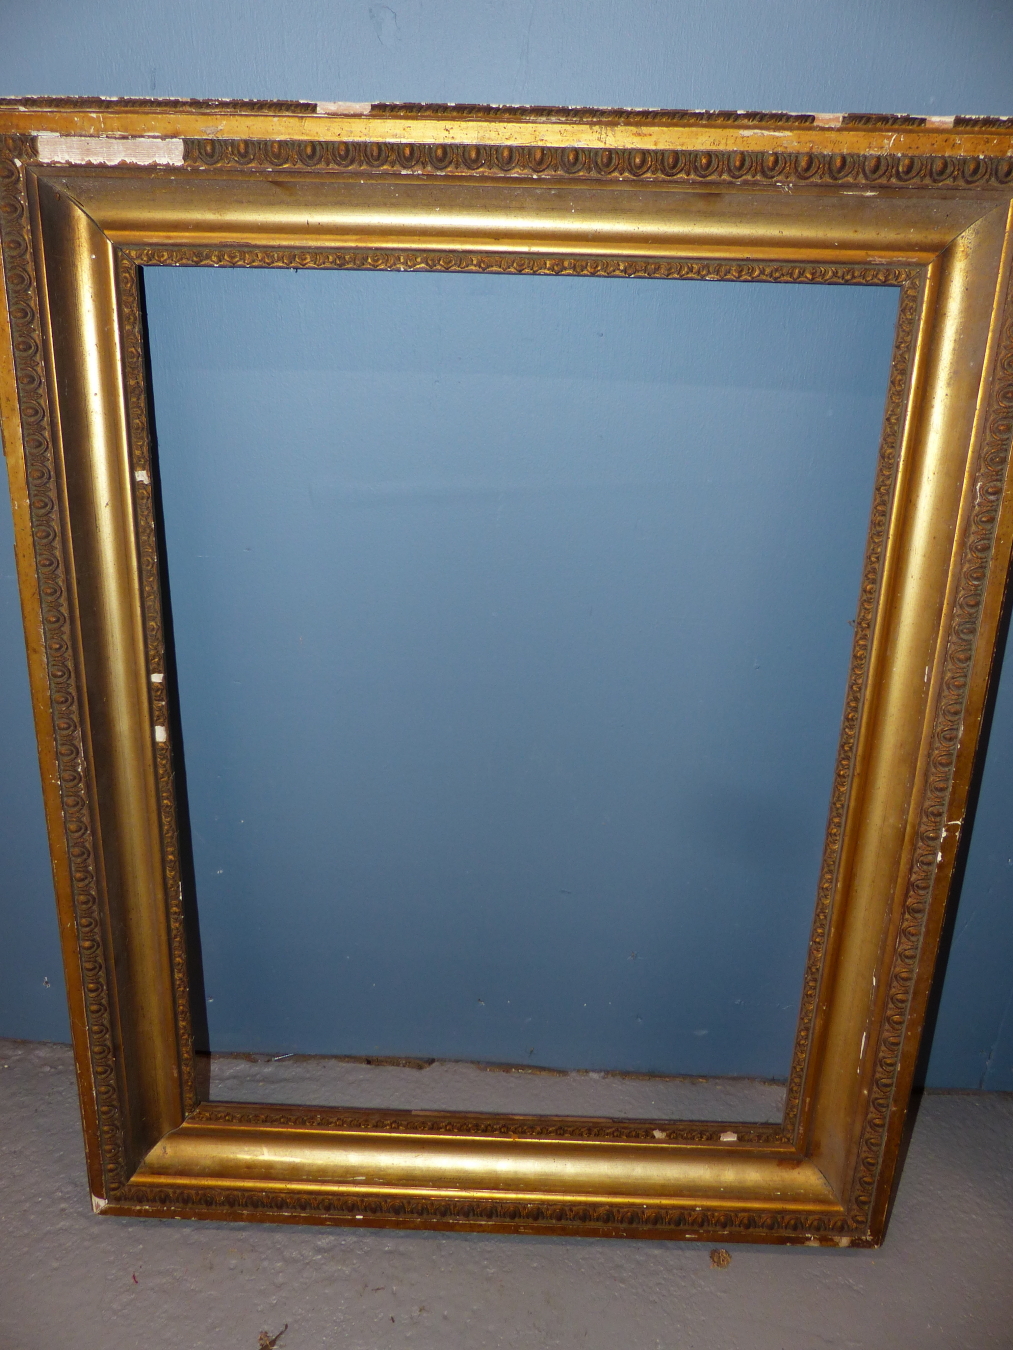 FOUR VARIOUS GILTWOOD AND GESSO PICTURE FRAMES, SIZES VARY. (4) - Image 2 of 5